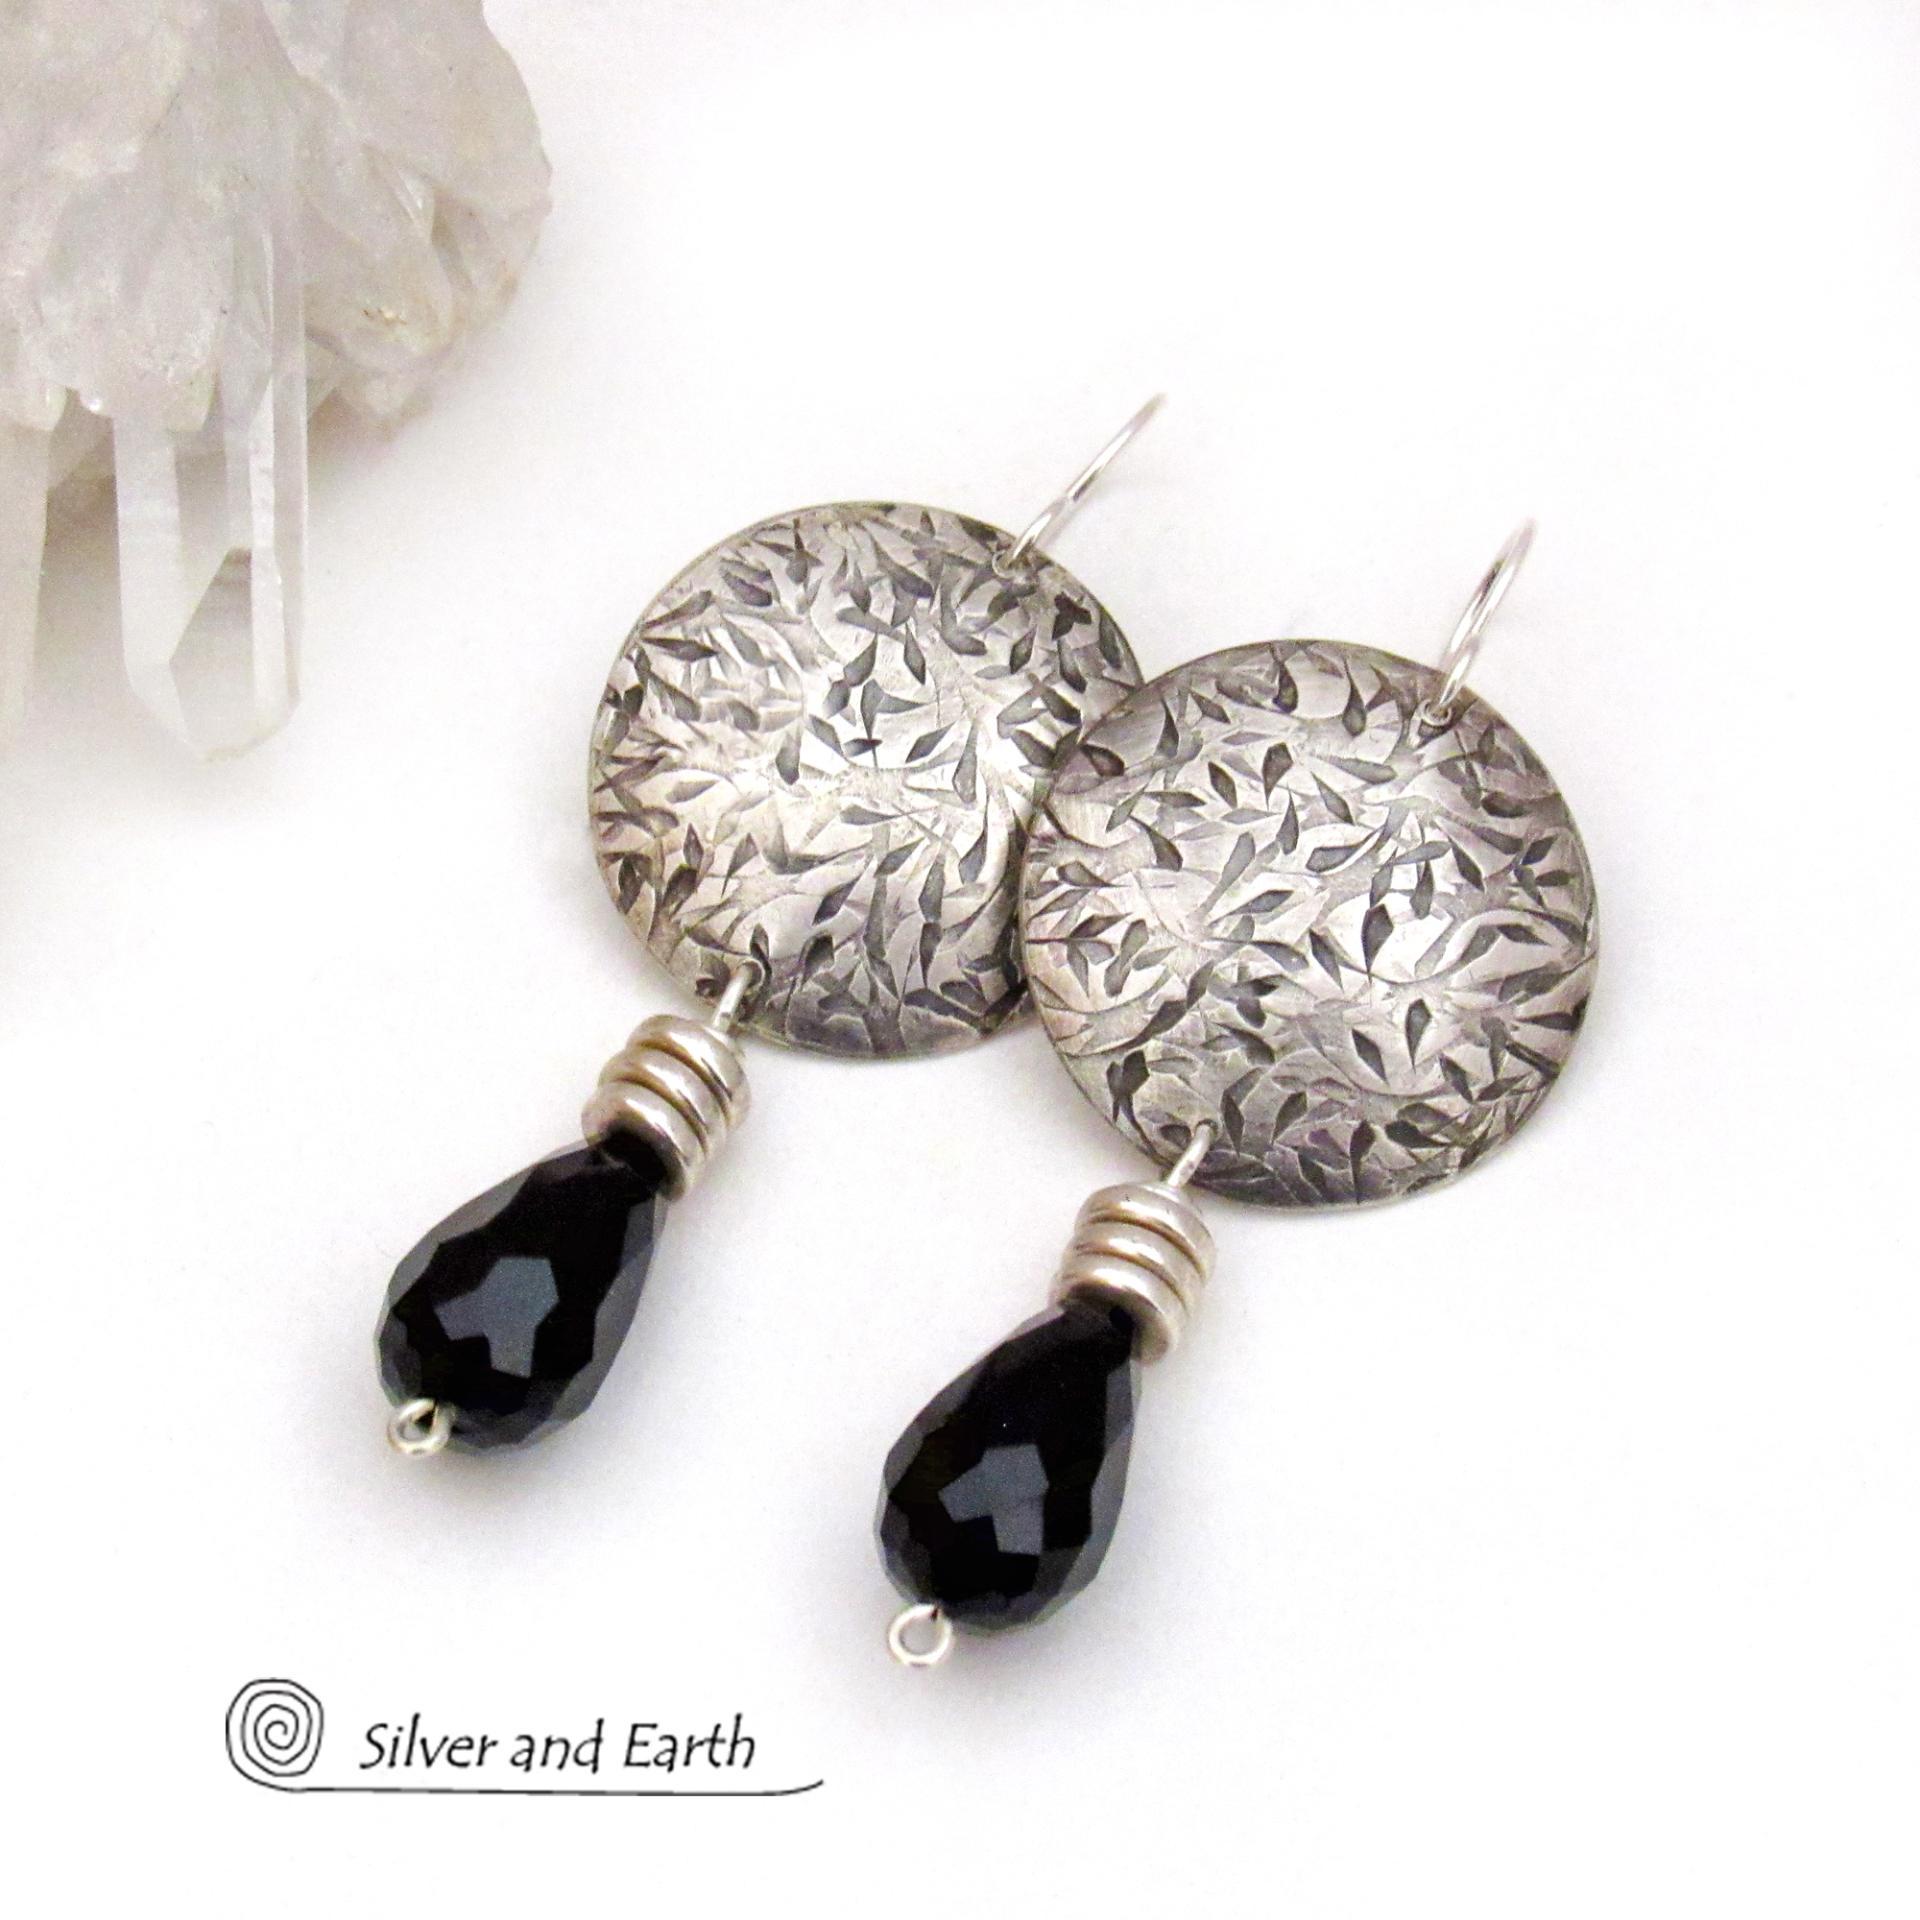 Sterling Silver Earrings with Dangling Black Faceted Crystals - Elegant Dressy Modern Silver Jewelry